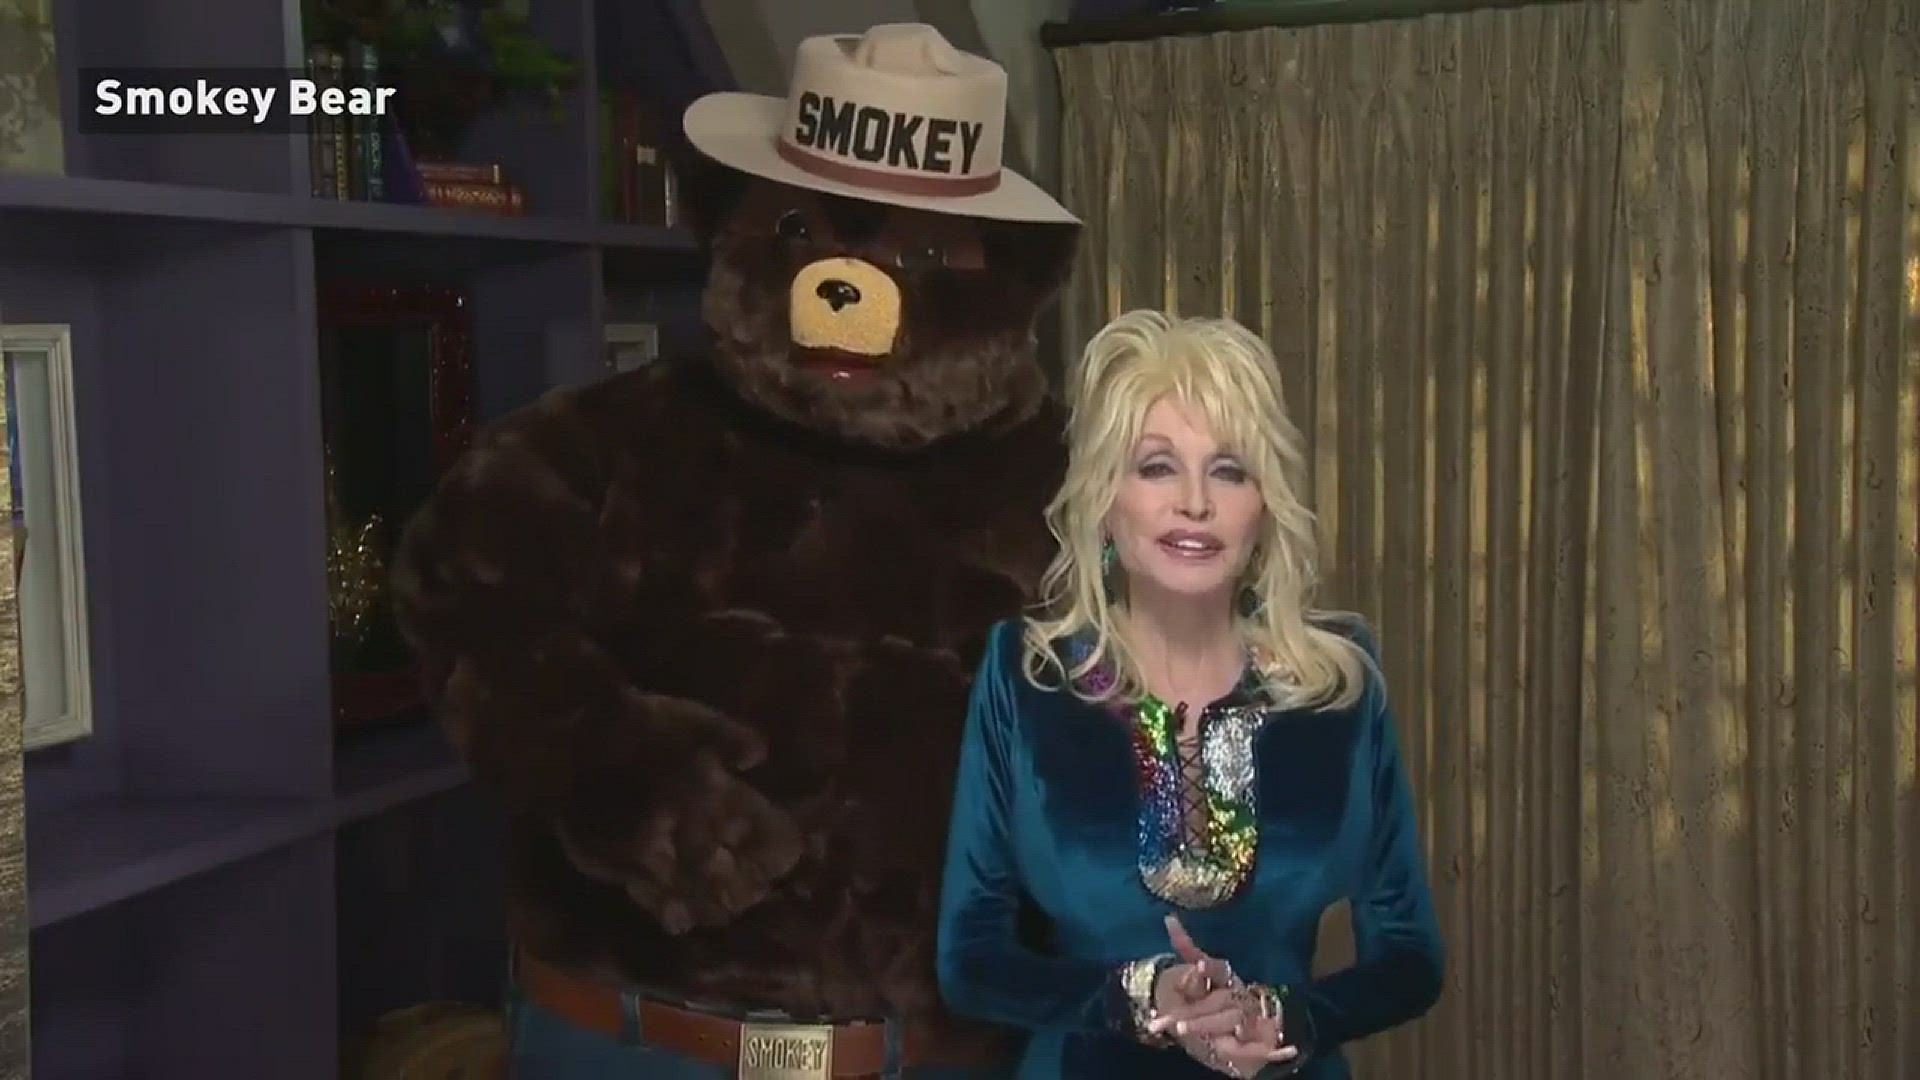 Dolly Parton and Smokey Bear are asking for the public's help in preventing wildfires in videos released during the weekend.